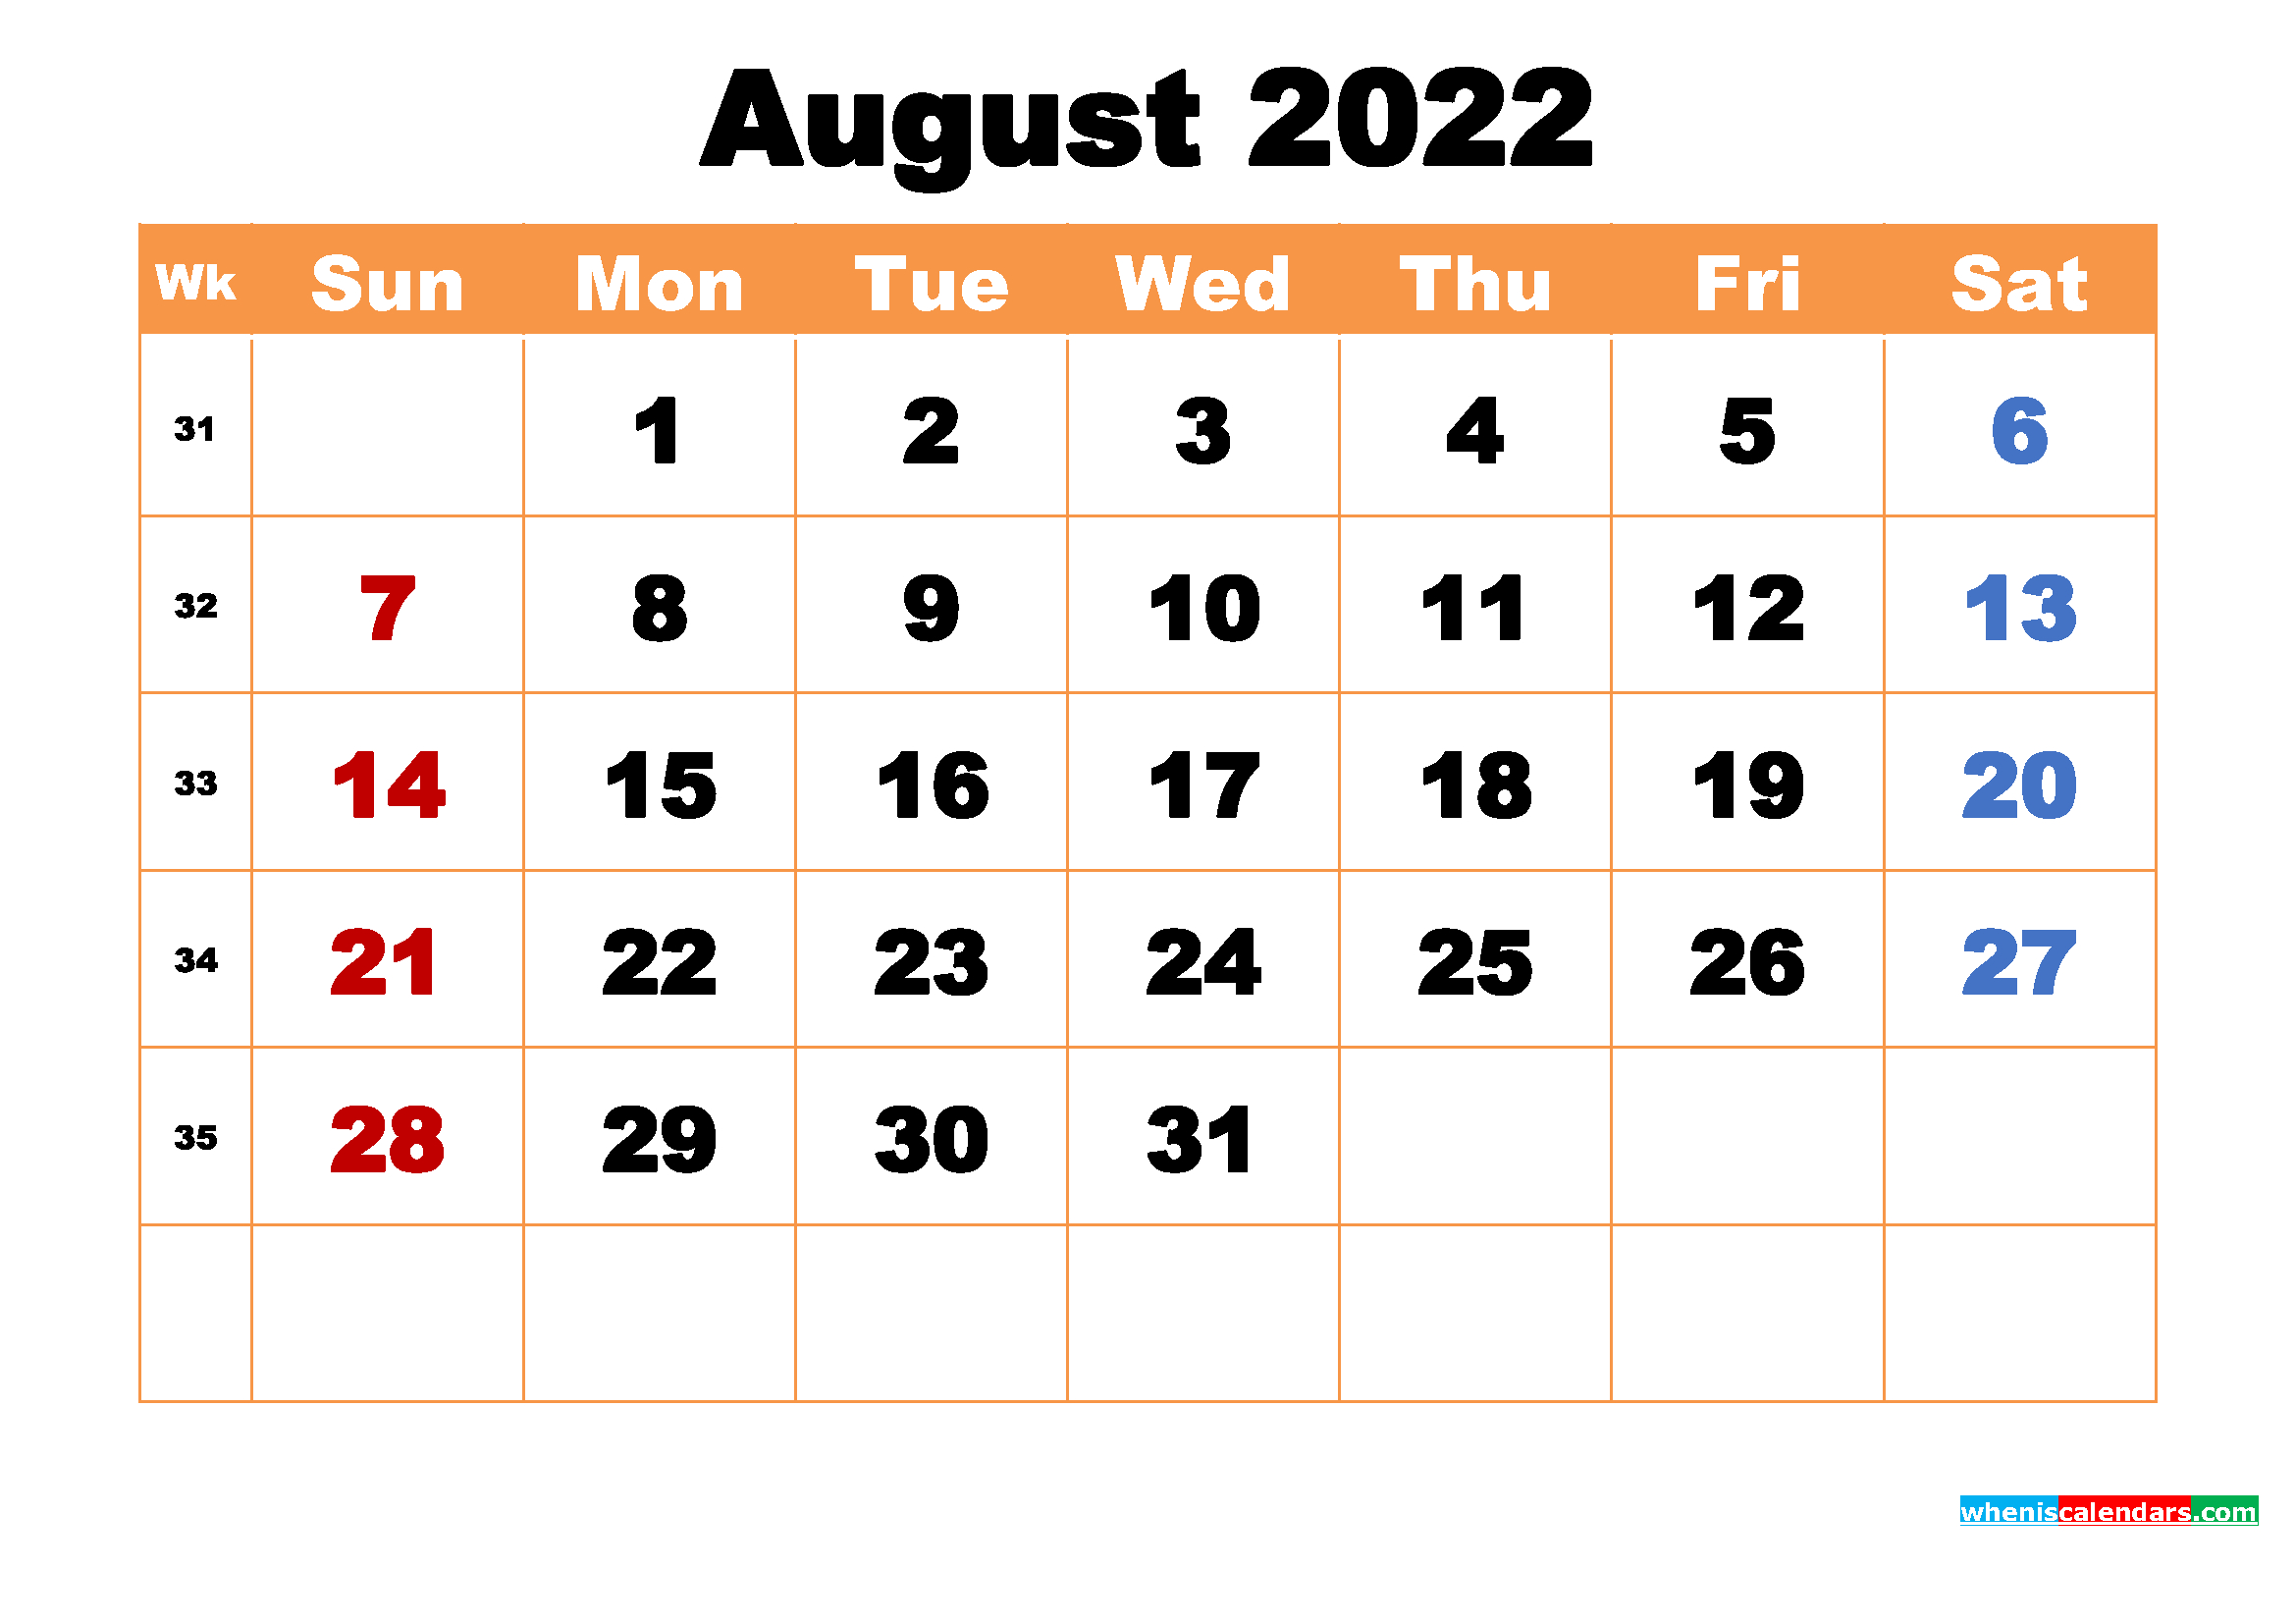 August 2022 Printable Monthly Calendar With Holidays  Free Printable inside Free 2022 Monthly Calendars That Are Printable